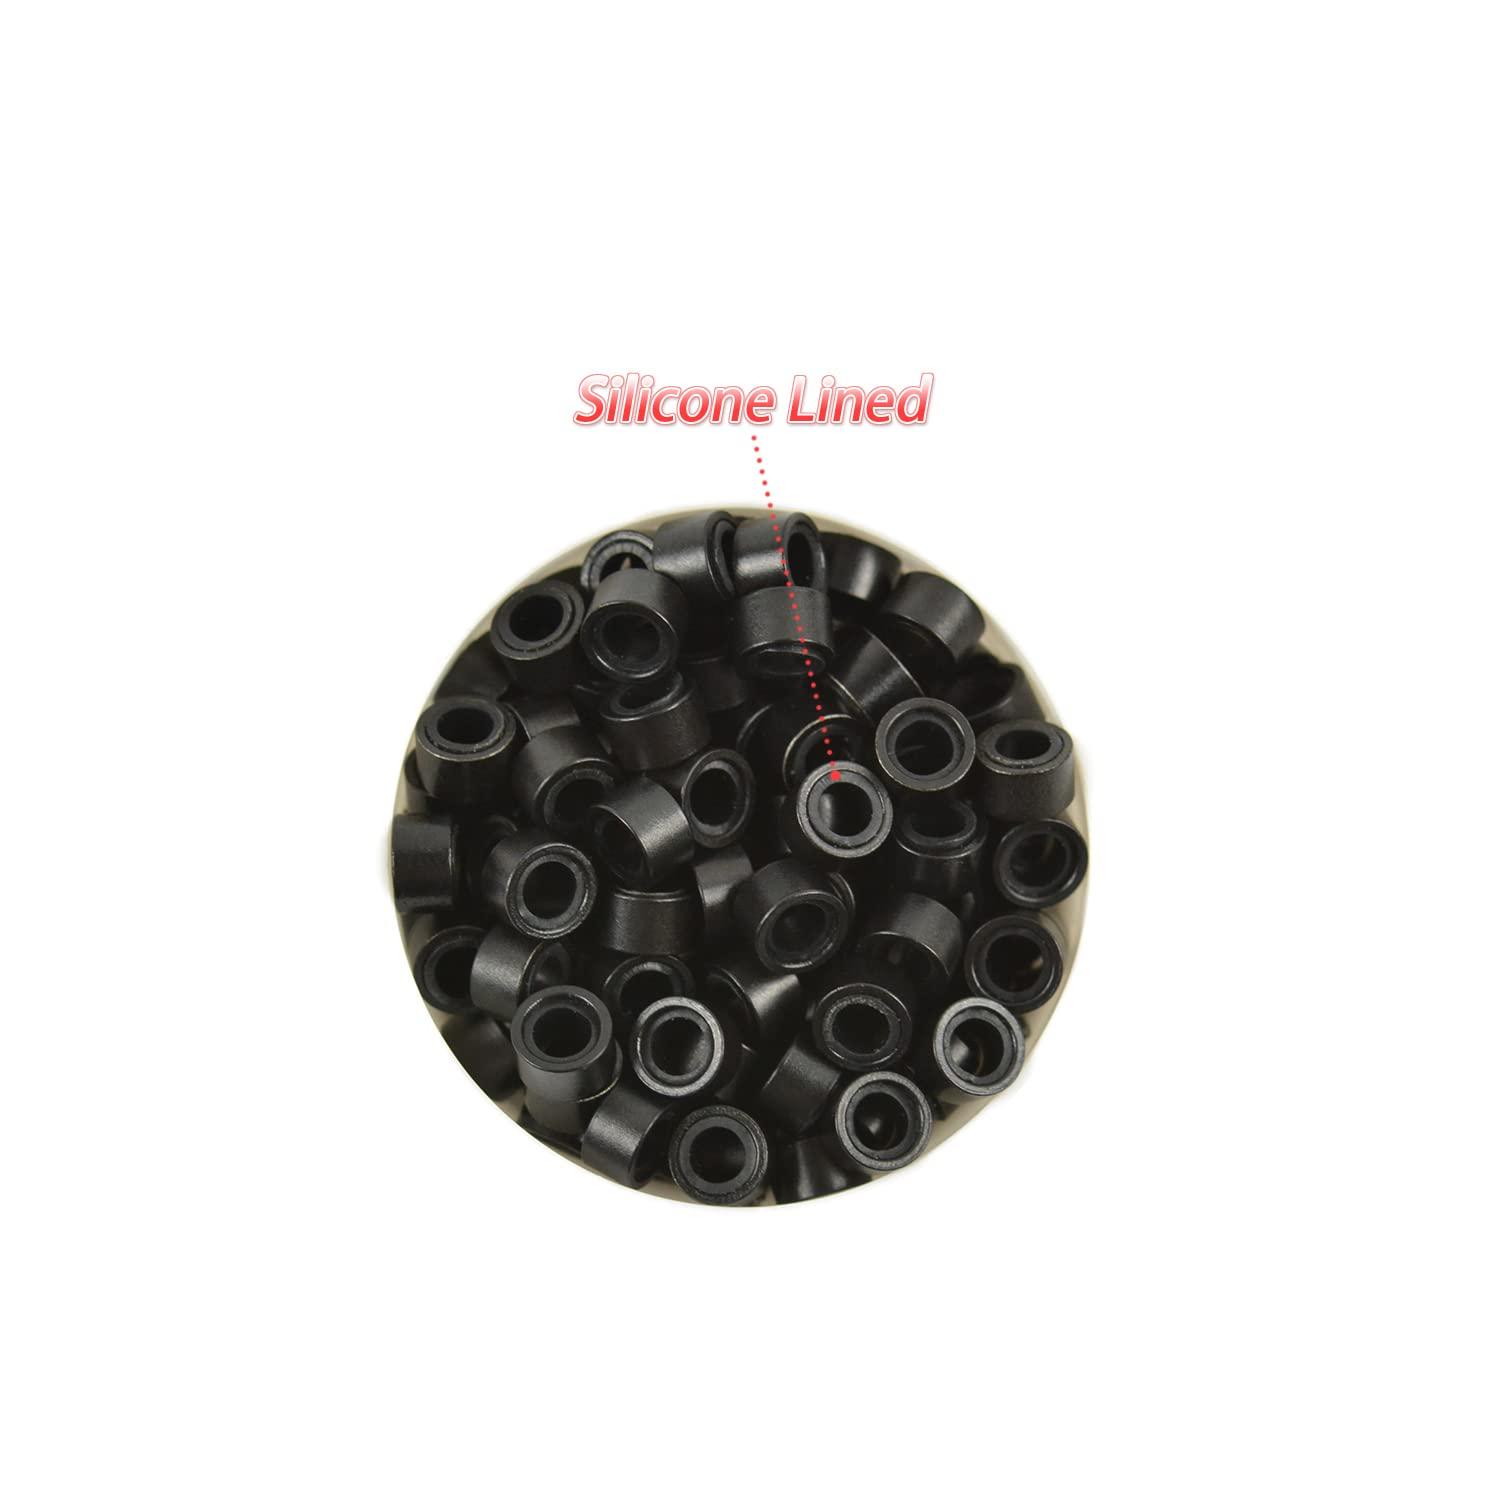 1000 Pcs Silicone Lined Micro Rings Links Beads 5mm Lined Beads for Hair  Extensions Tool (Black+Dark Brown+Brown+Dark Blonde+Blonde)